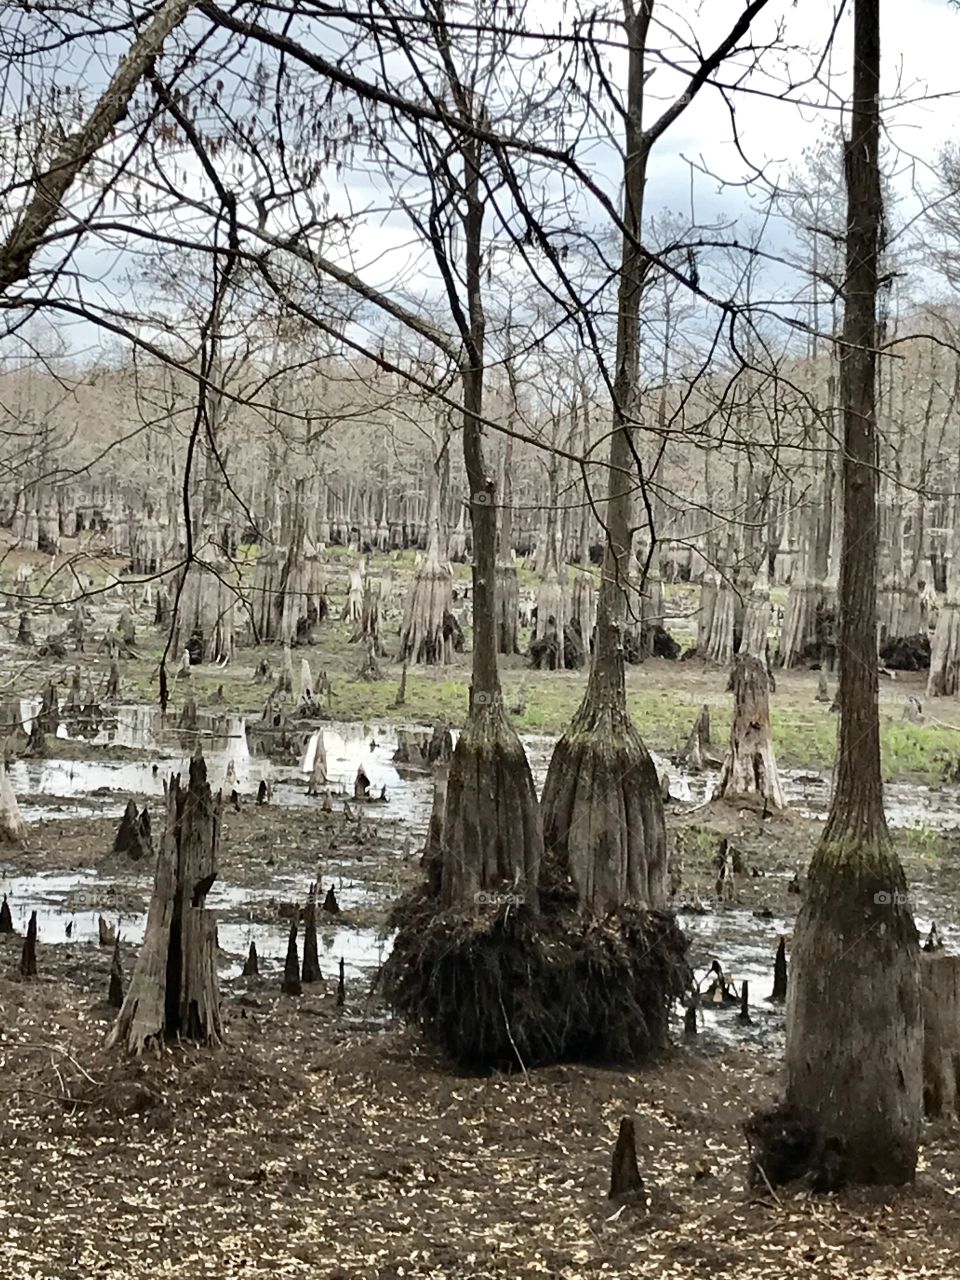 View of a drained Cypress tree filled lake showing cypress knees and tree rings where the lake water usually is